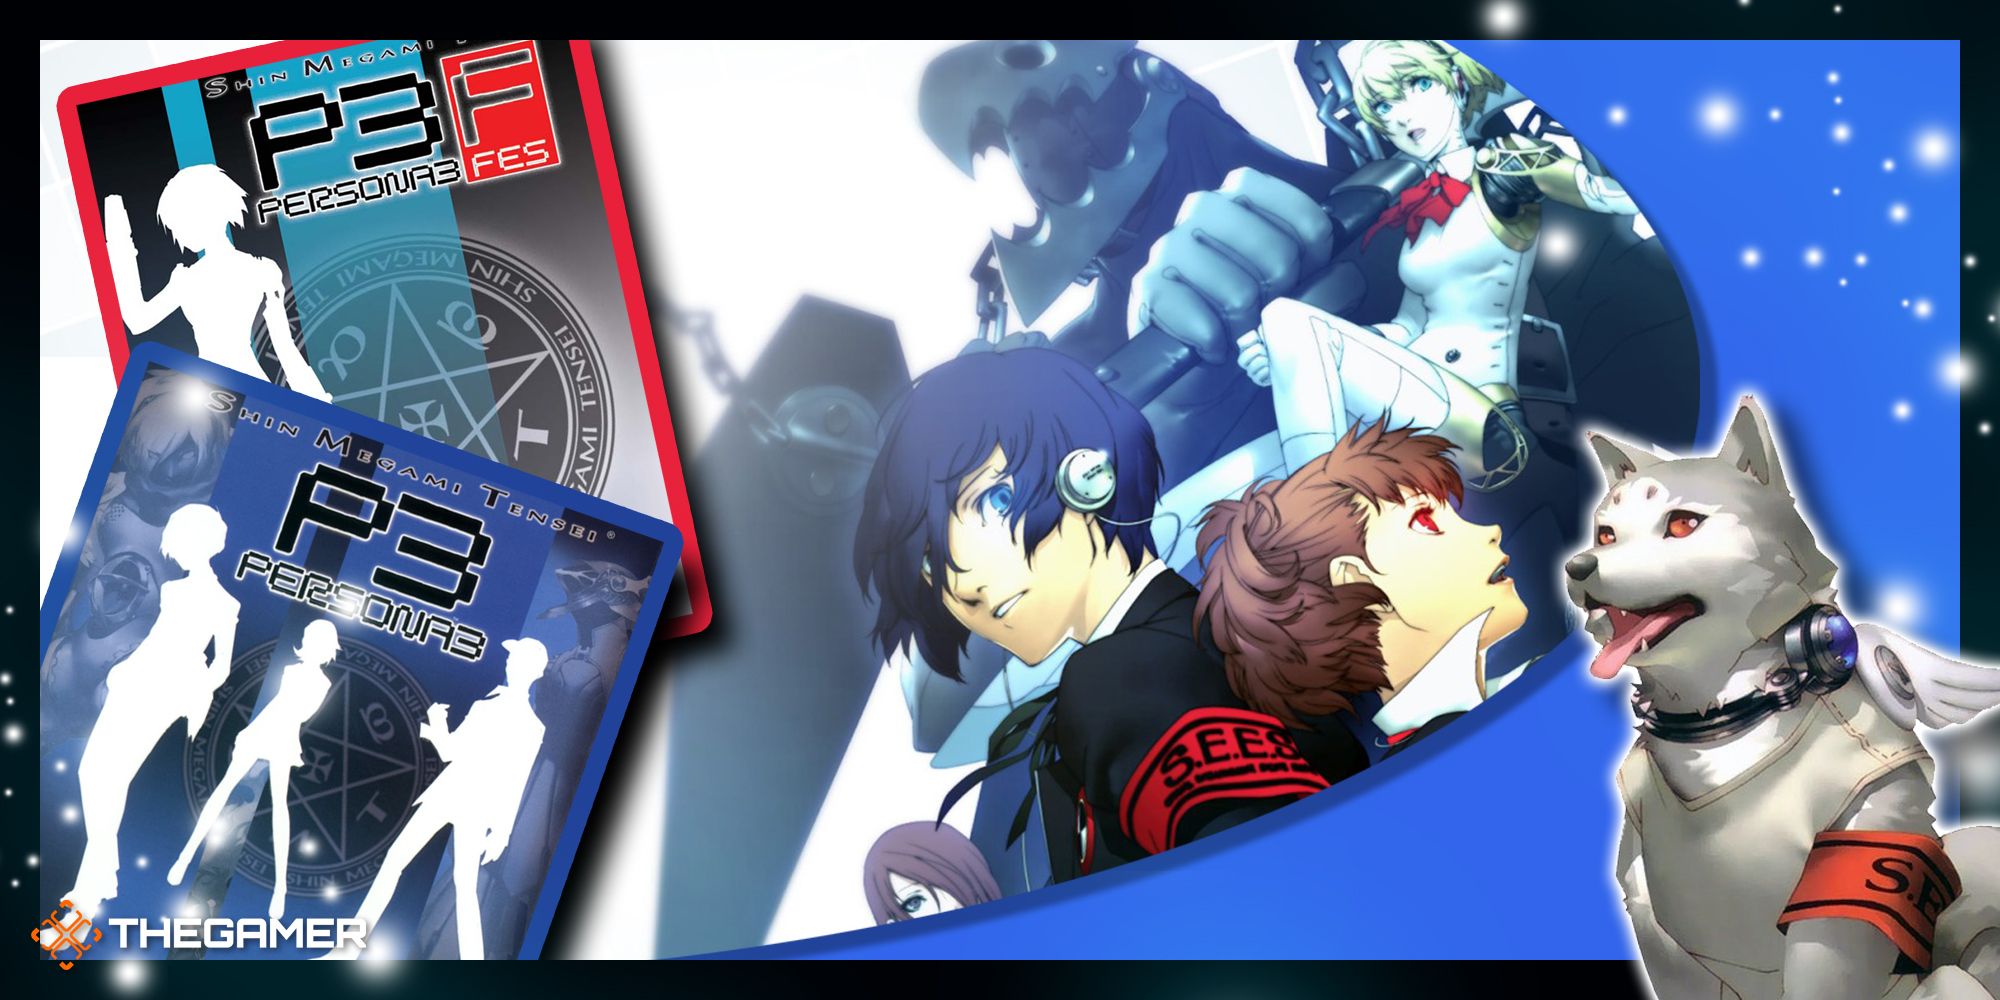 compilation of the covers of persona 3, persona 3 fes, and persona 3 portable